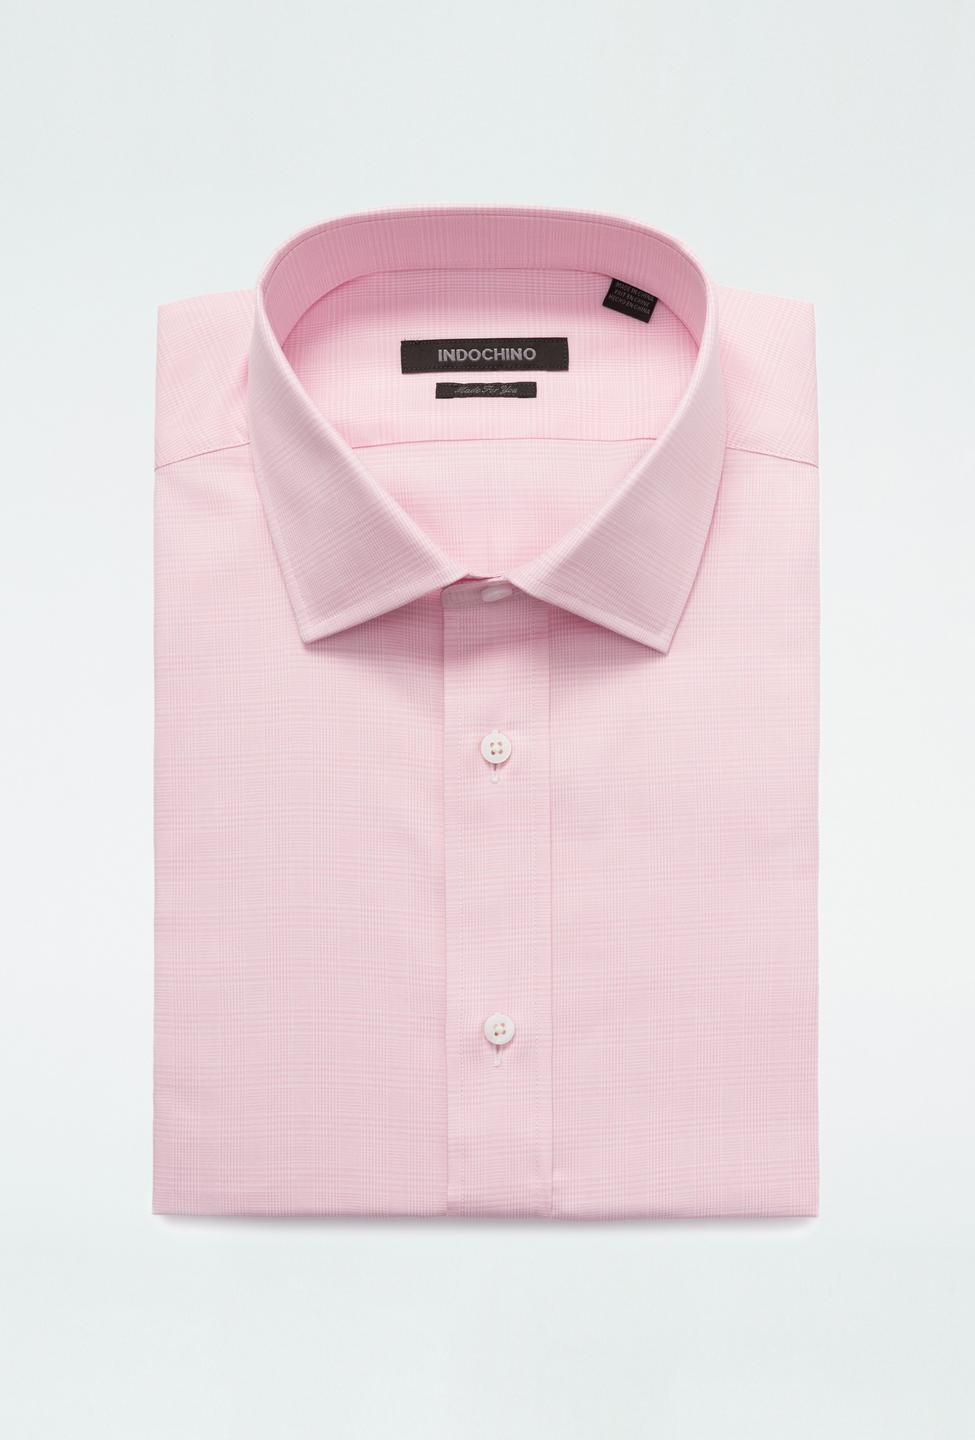 Pink shirt - Hadleigh Plaid Design from Premium Indochino Collection